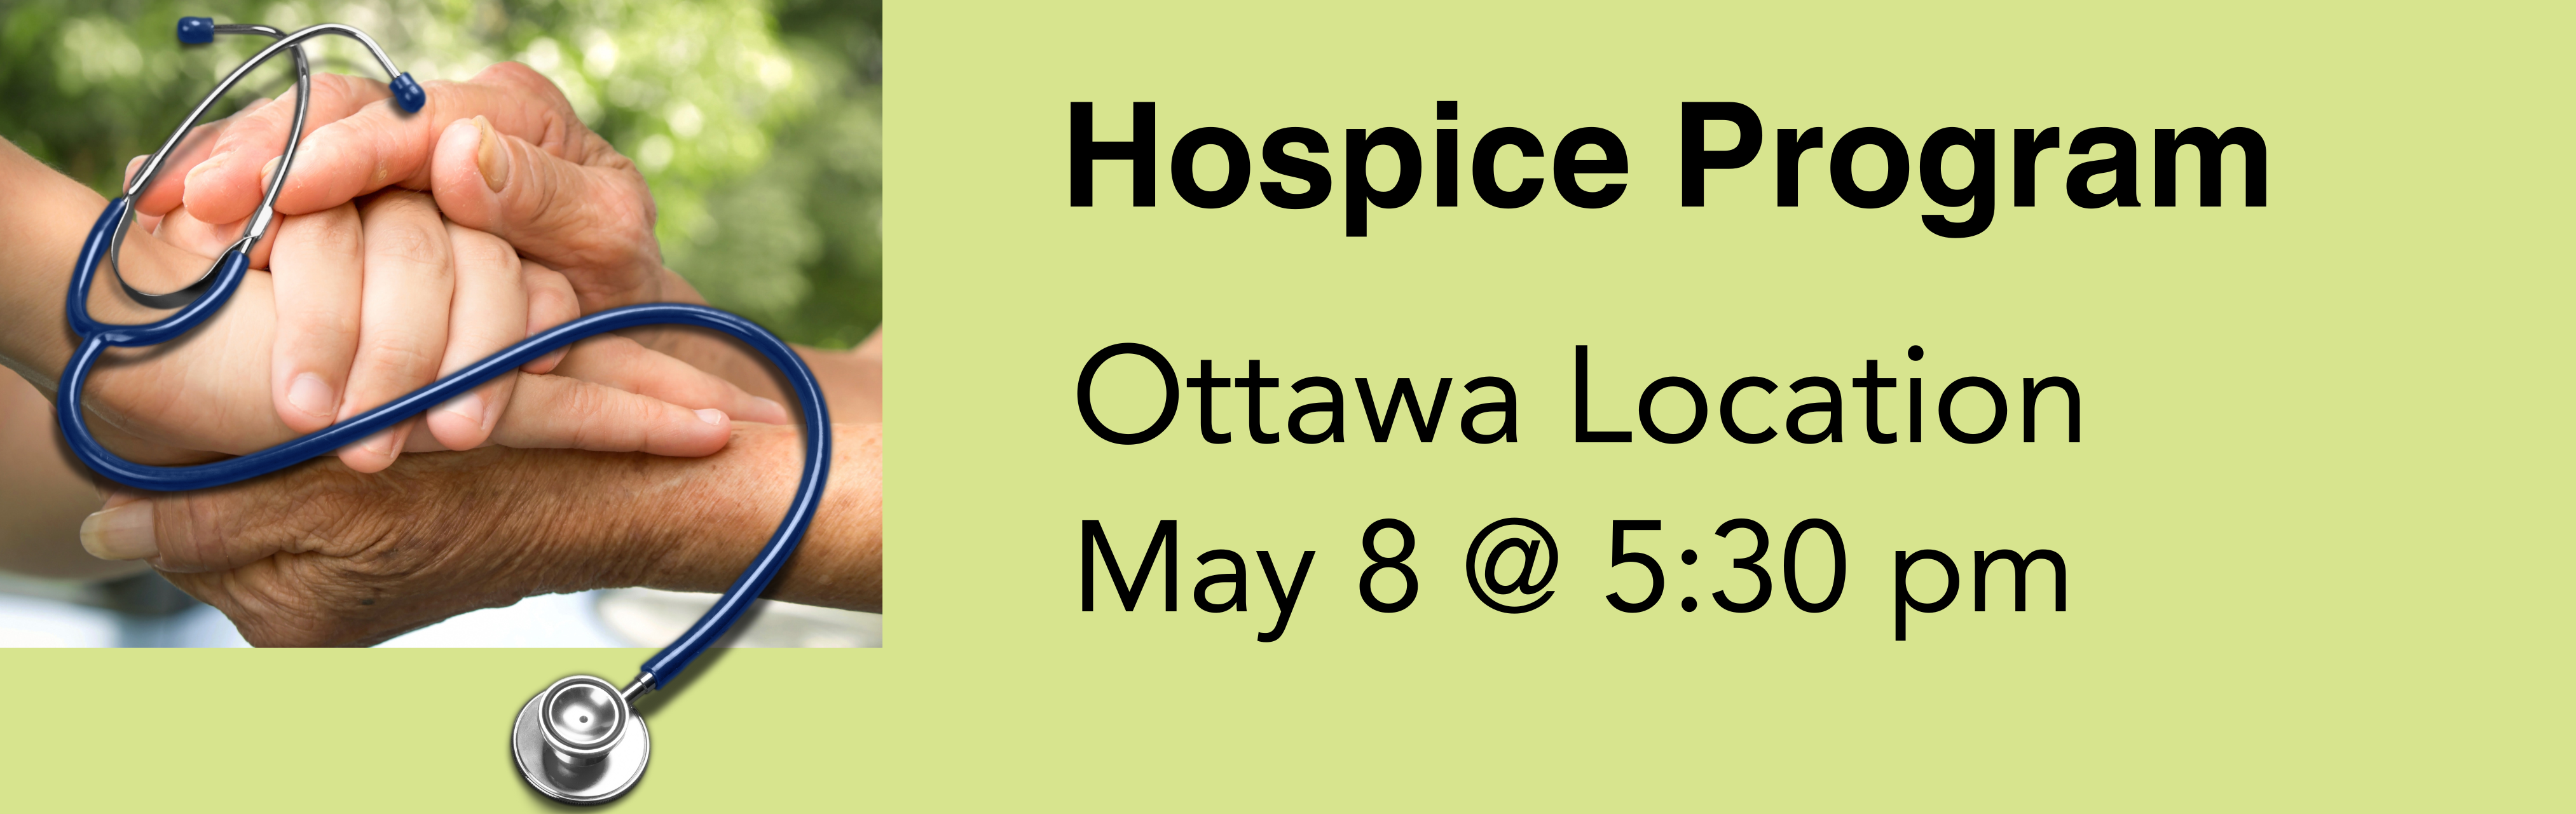 2 people holding hands and a stethoscope Hospice Program Ottawa Location May 8 5:30 pm